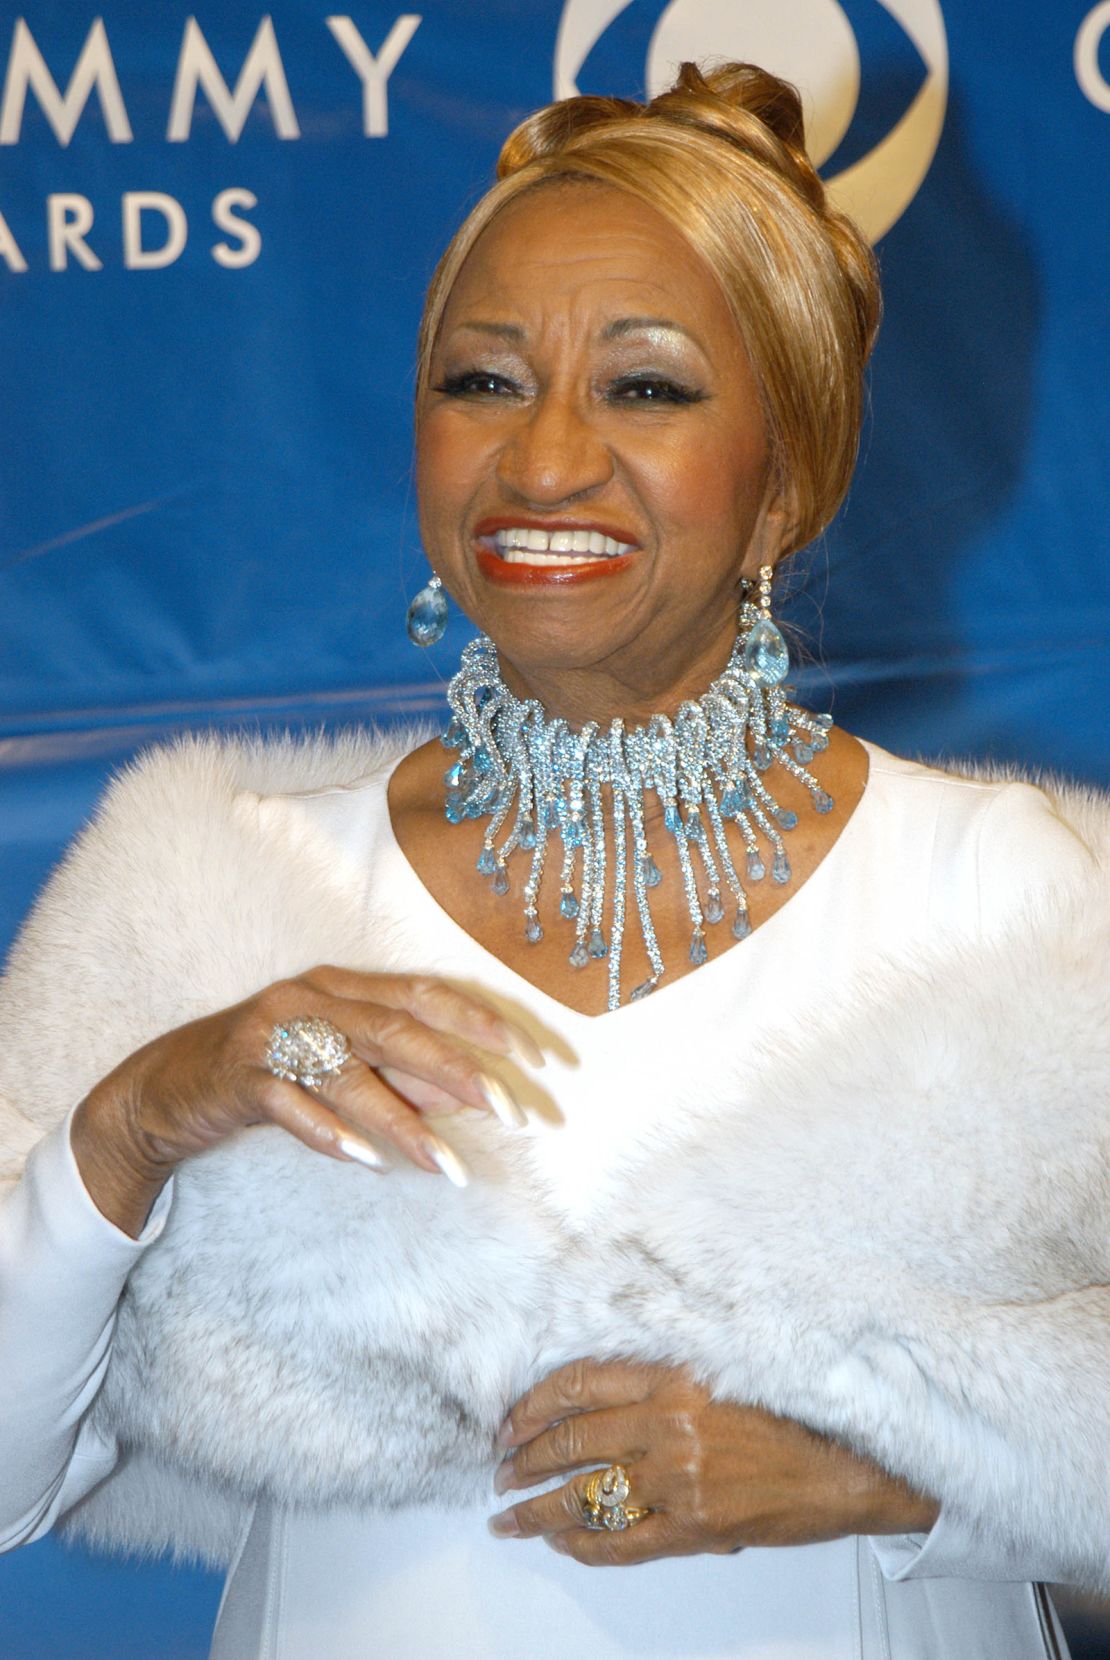 Celia Cruz, the "Queen of Salsa" and a prominent Afro Latino artist, will be honored in the American Latino museum's inaugural gallery.